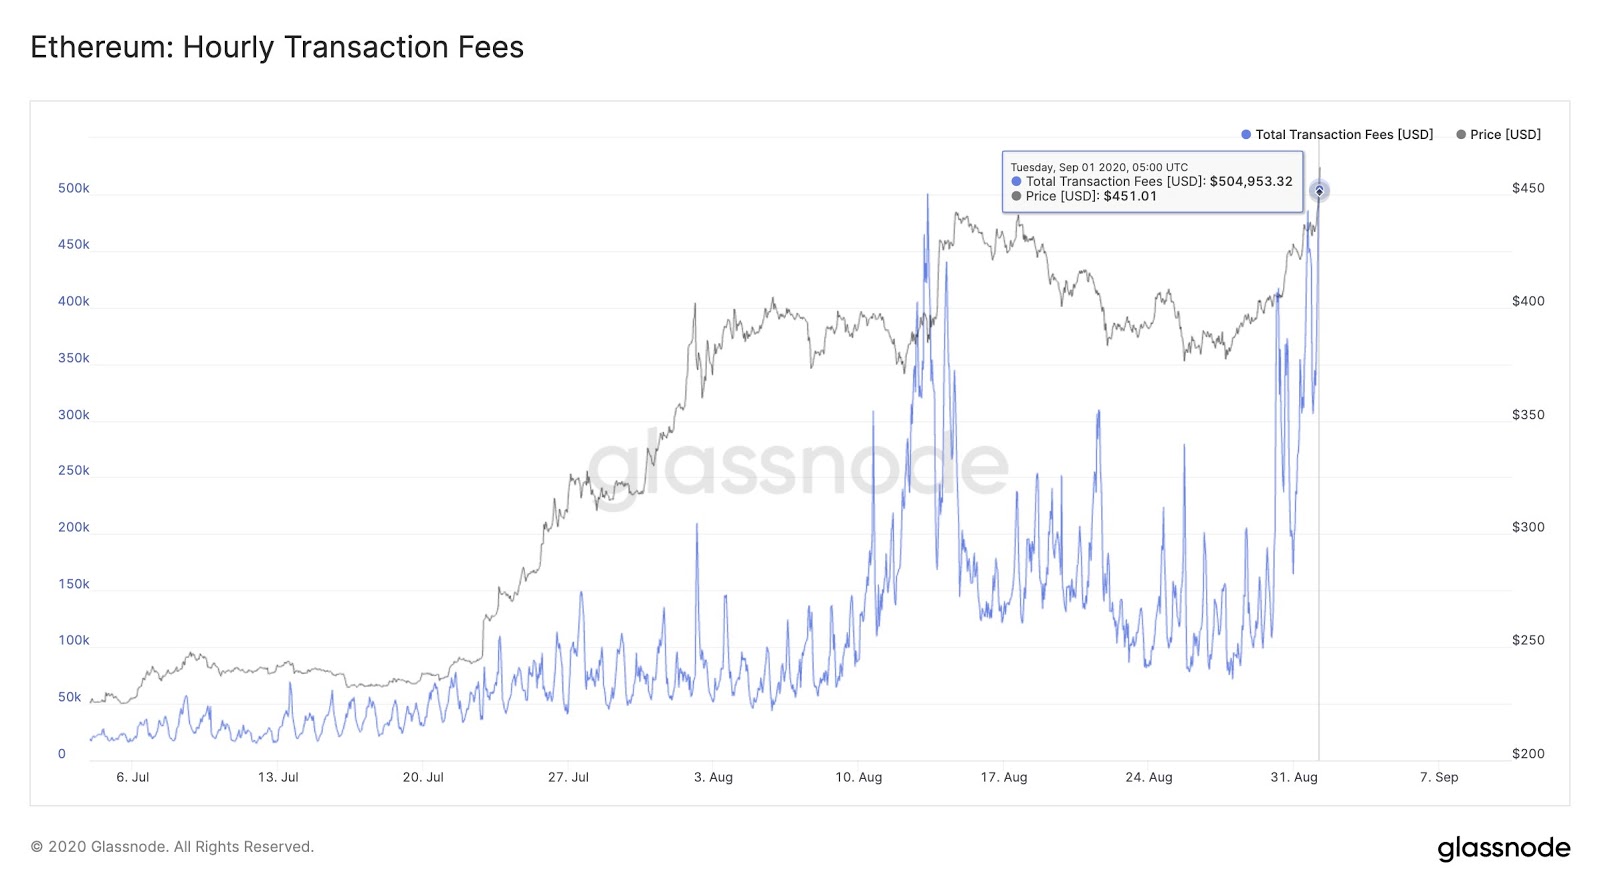 Hourly transaction fees on Ethereum spikes